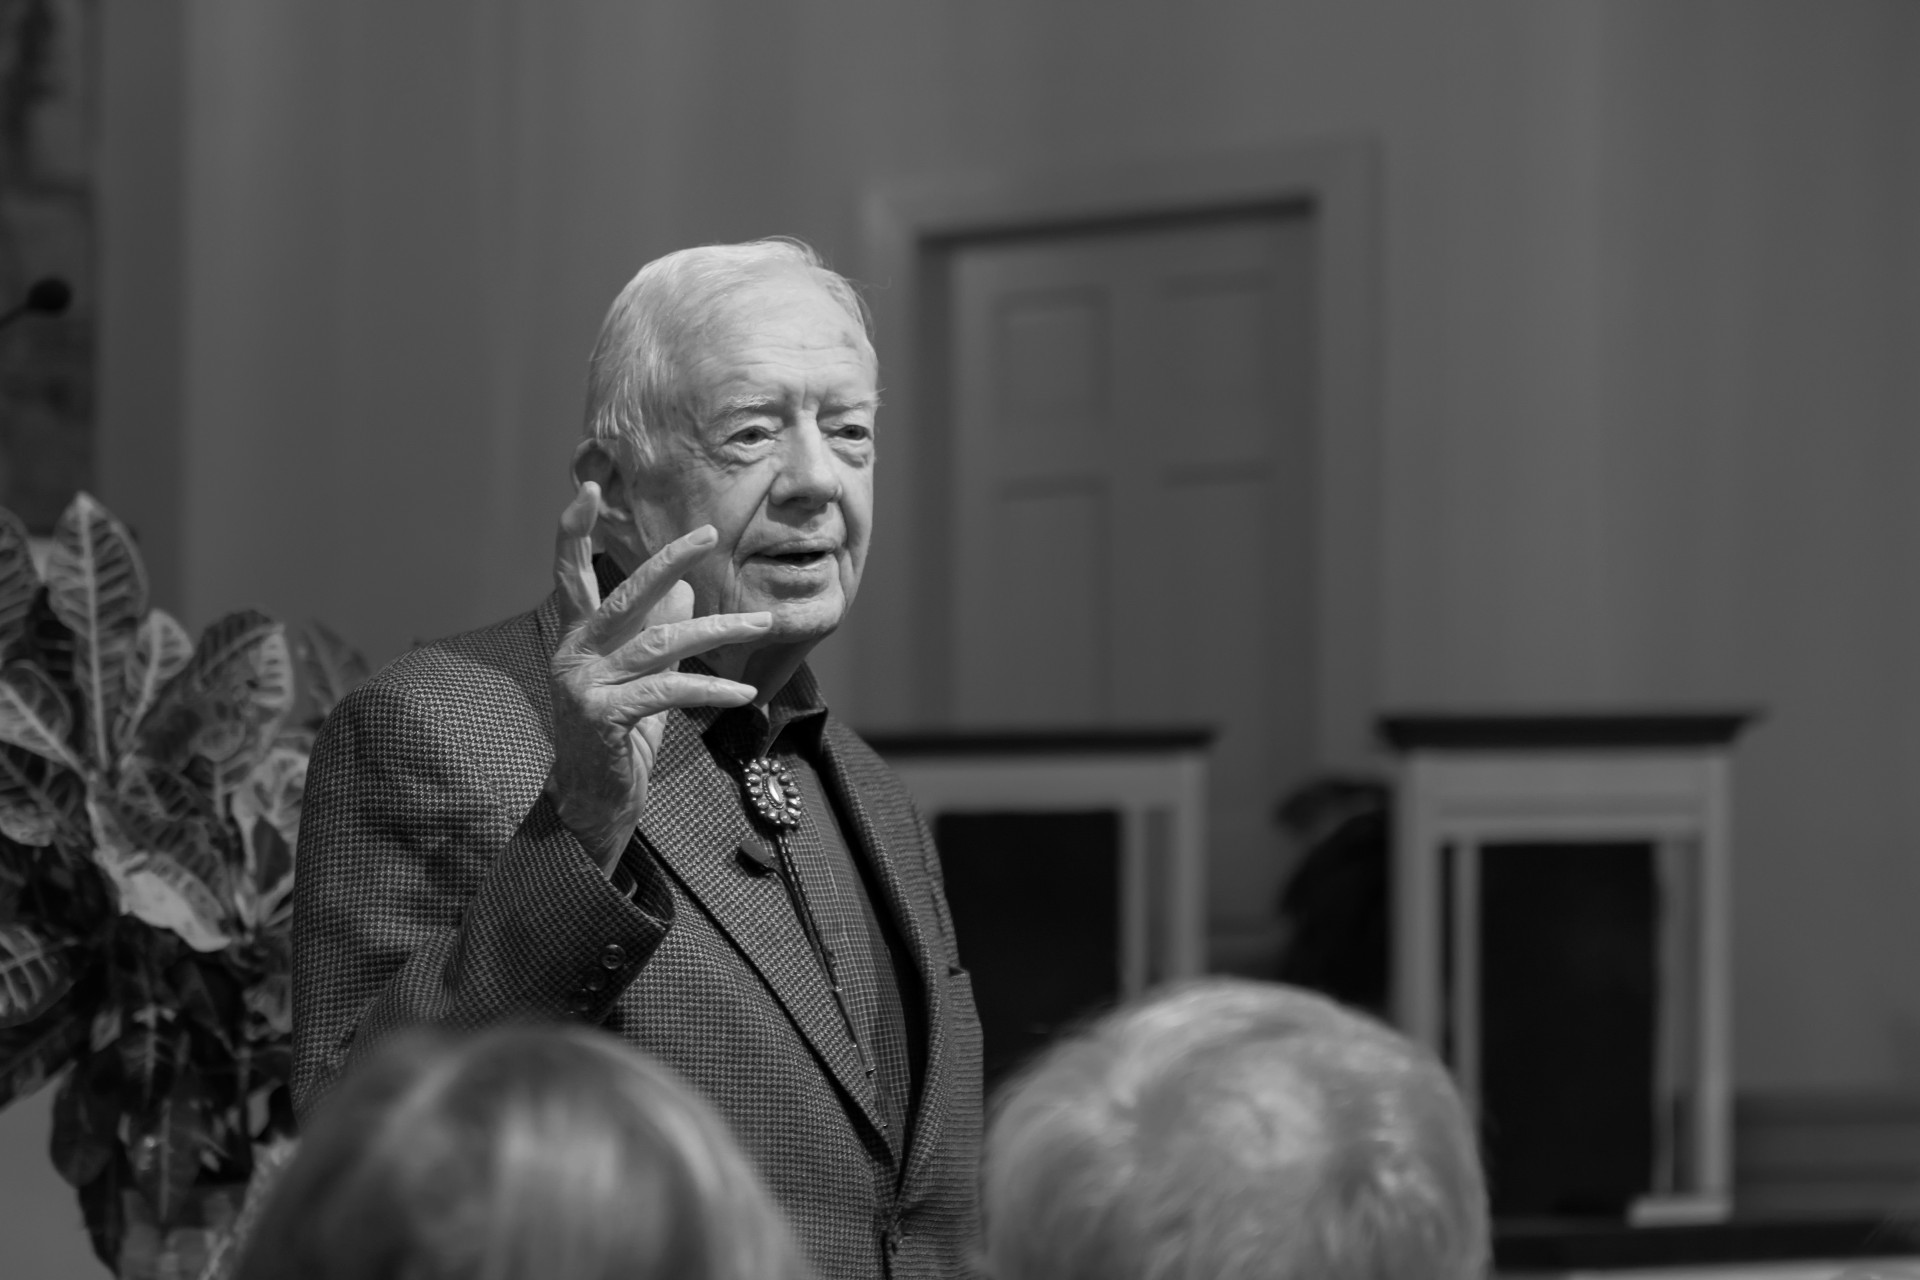 Jimmy Carter Receiving Hospice Care - What Does That Mean?